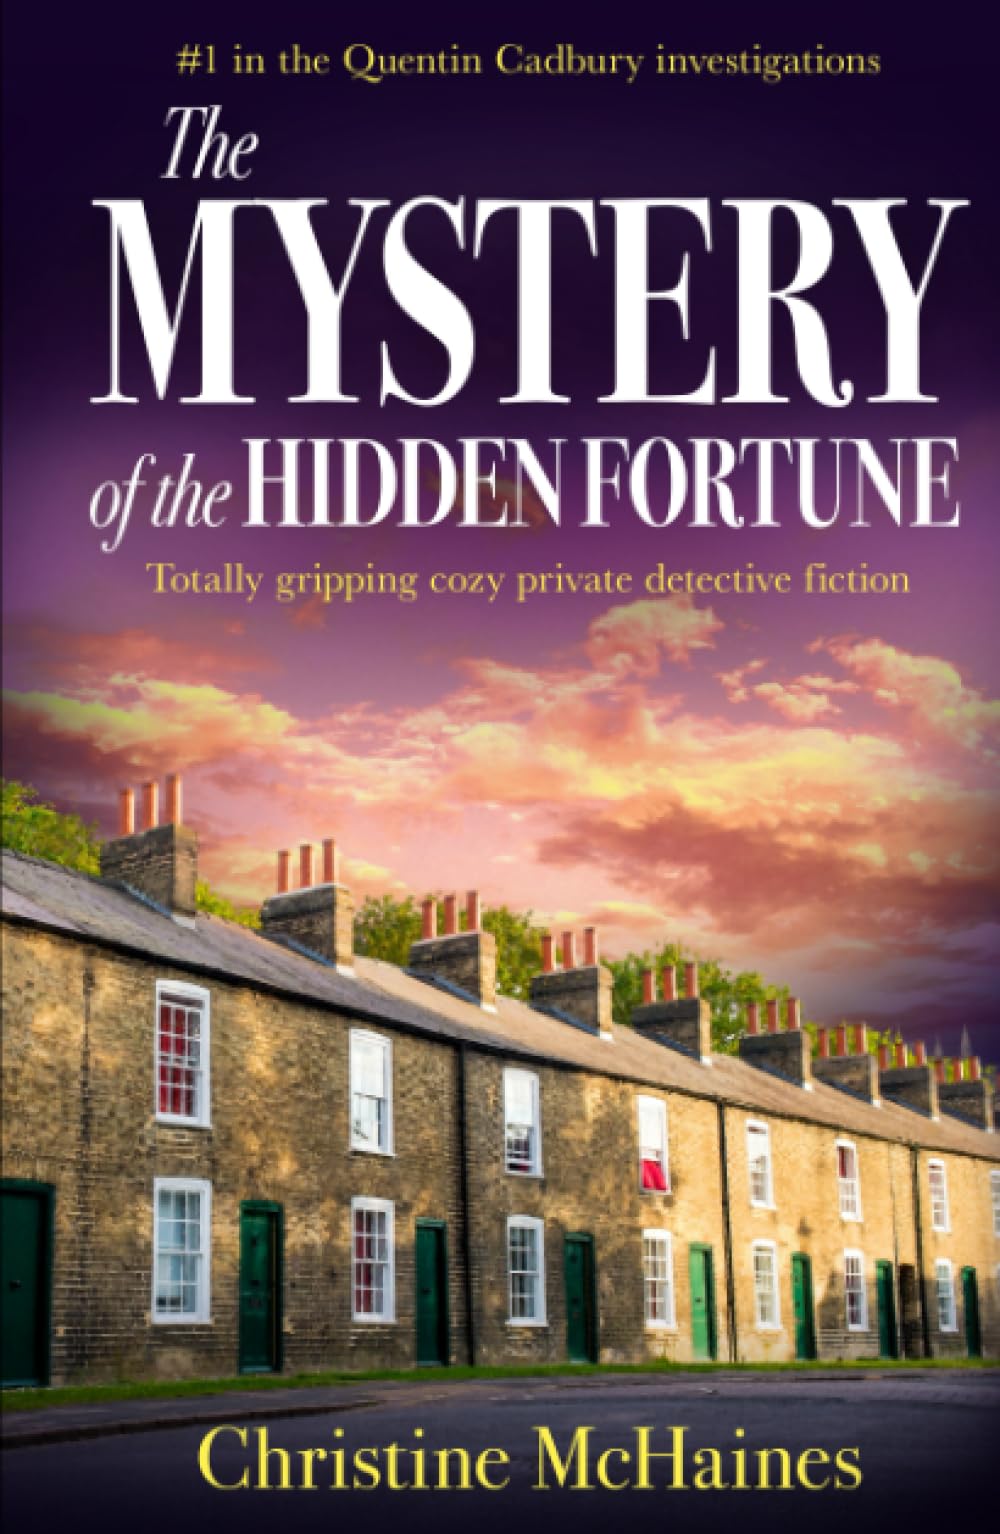 The Mystery of the Hidden Fortune book cover